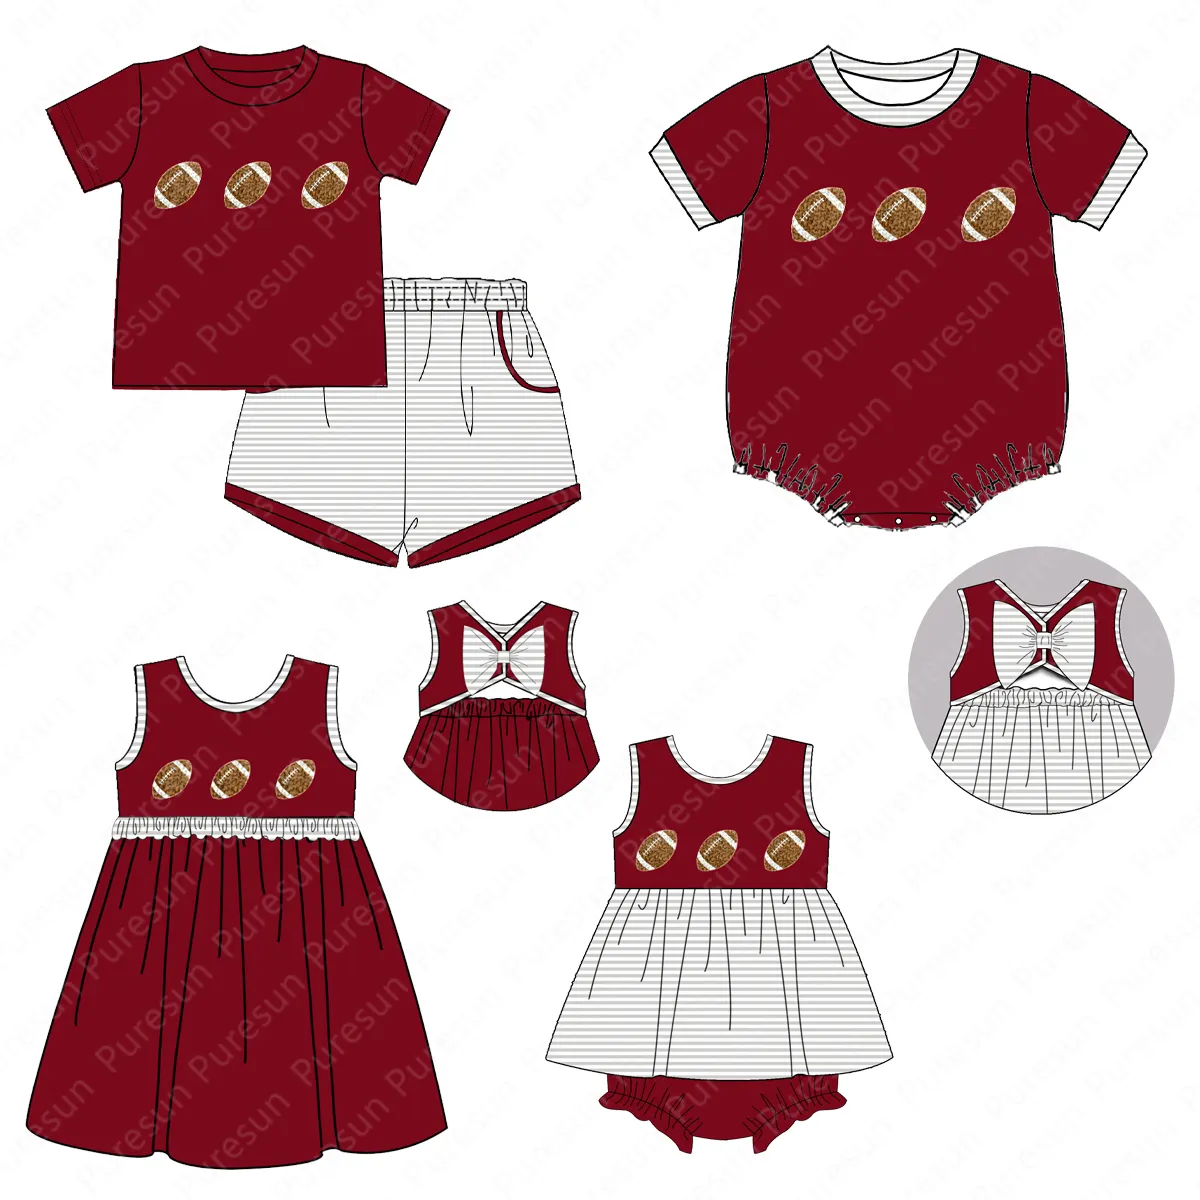 New design smocked football ruffle outfit Alabama crimson kids game day siblings matching french knot clothing sets